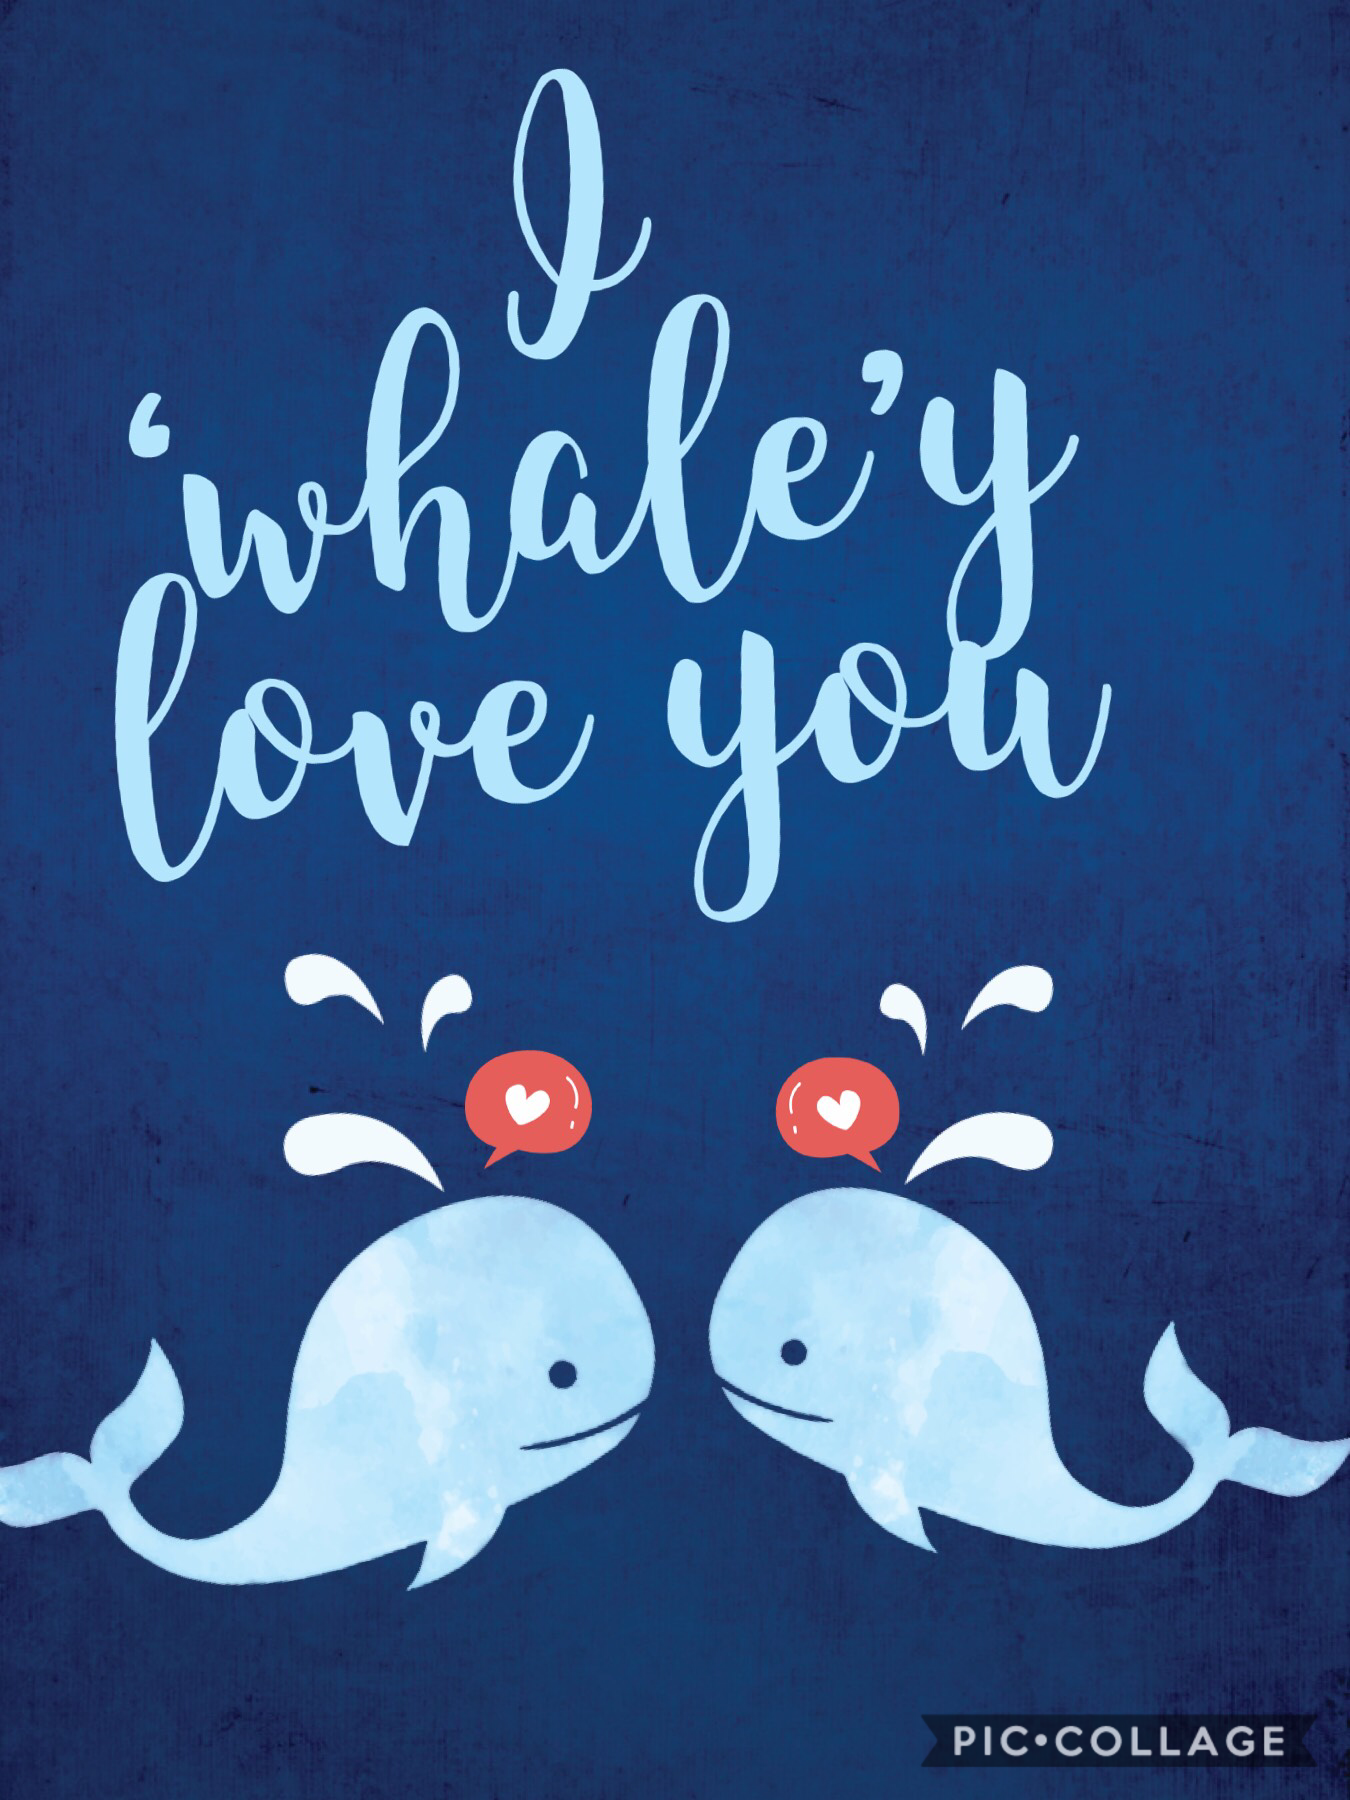 I whale’y love you 🐳🐋❤️